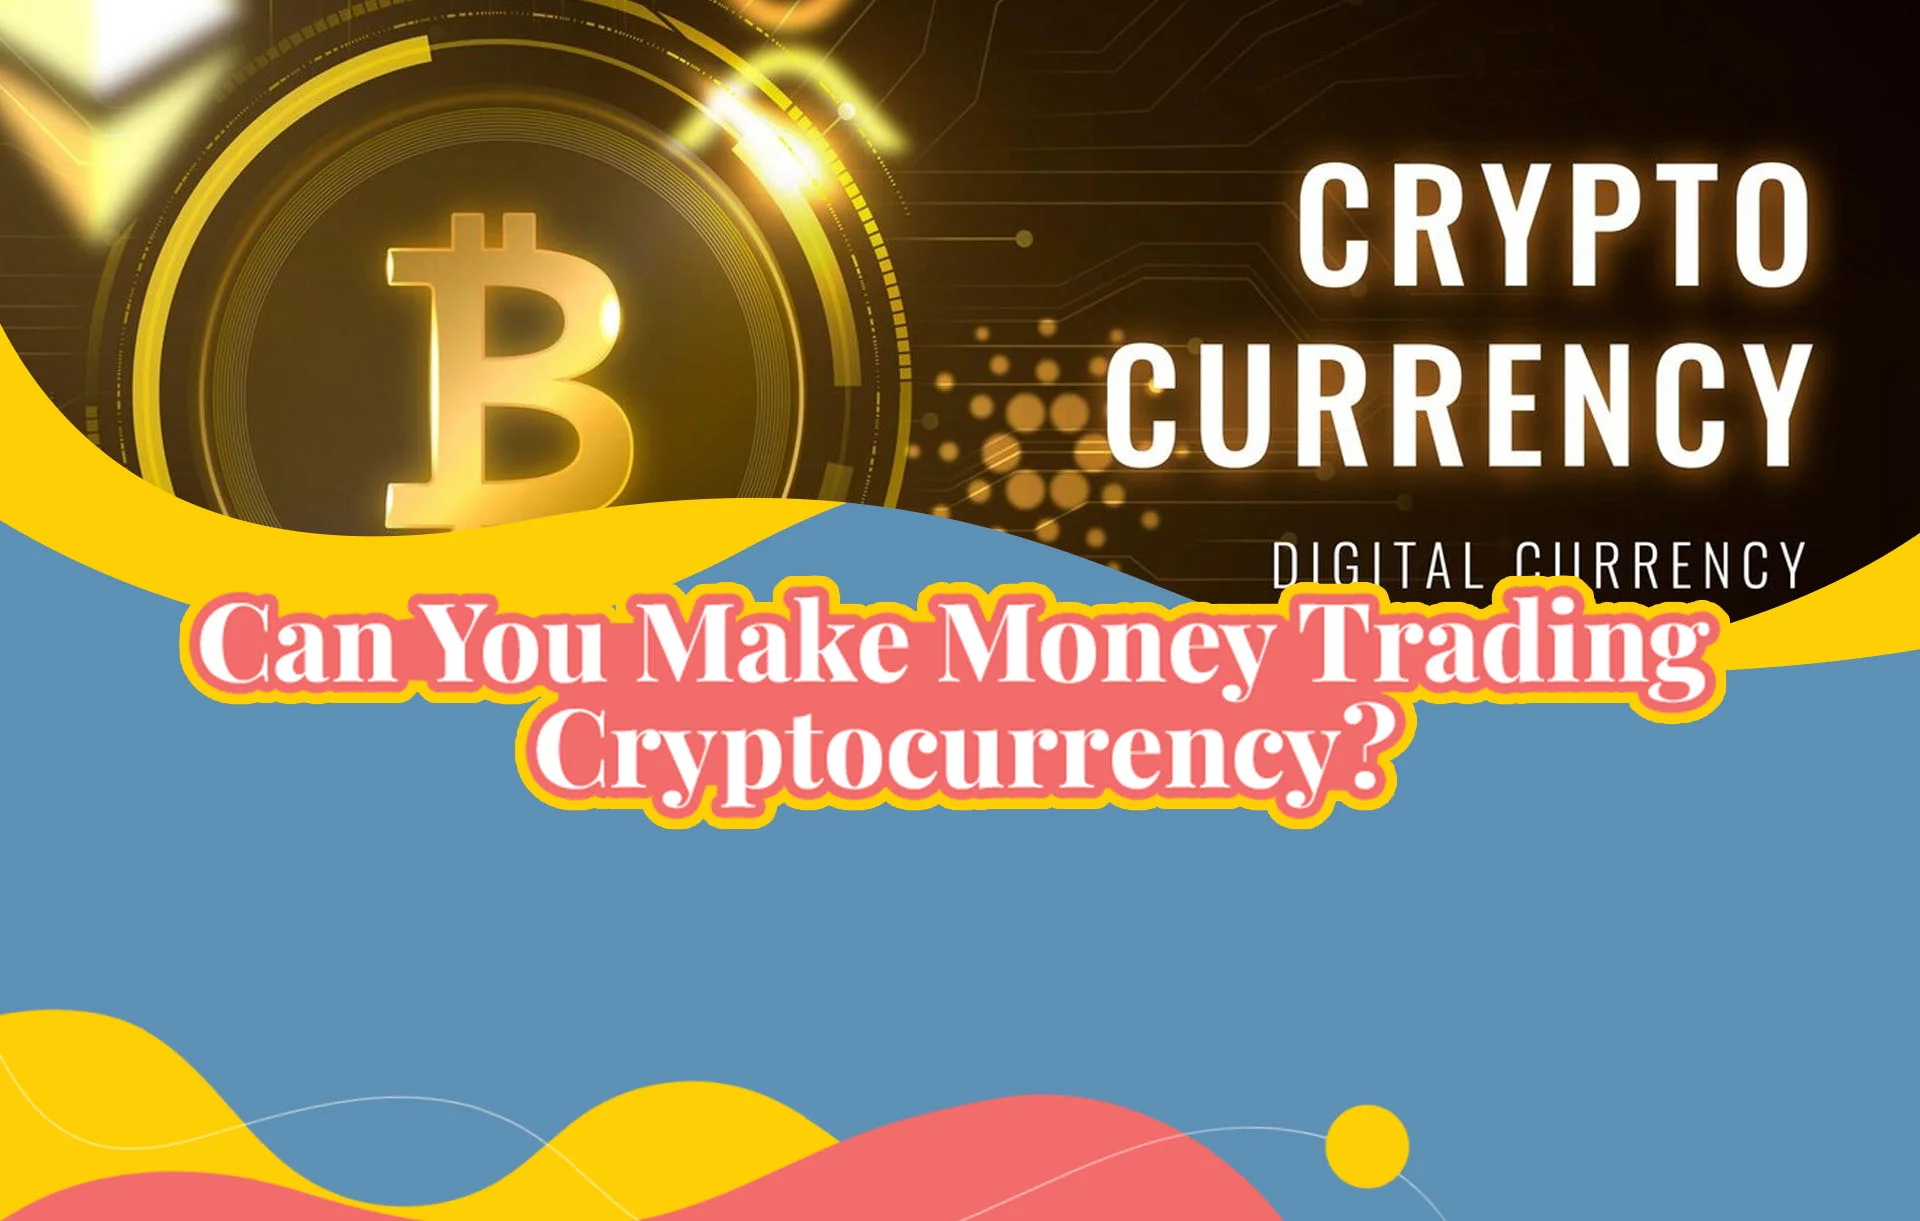 Can You Make Money Trading Cryptocurrency?